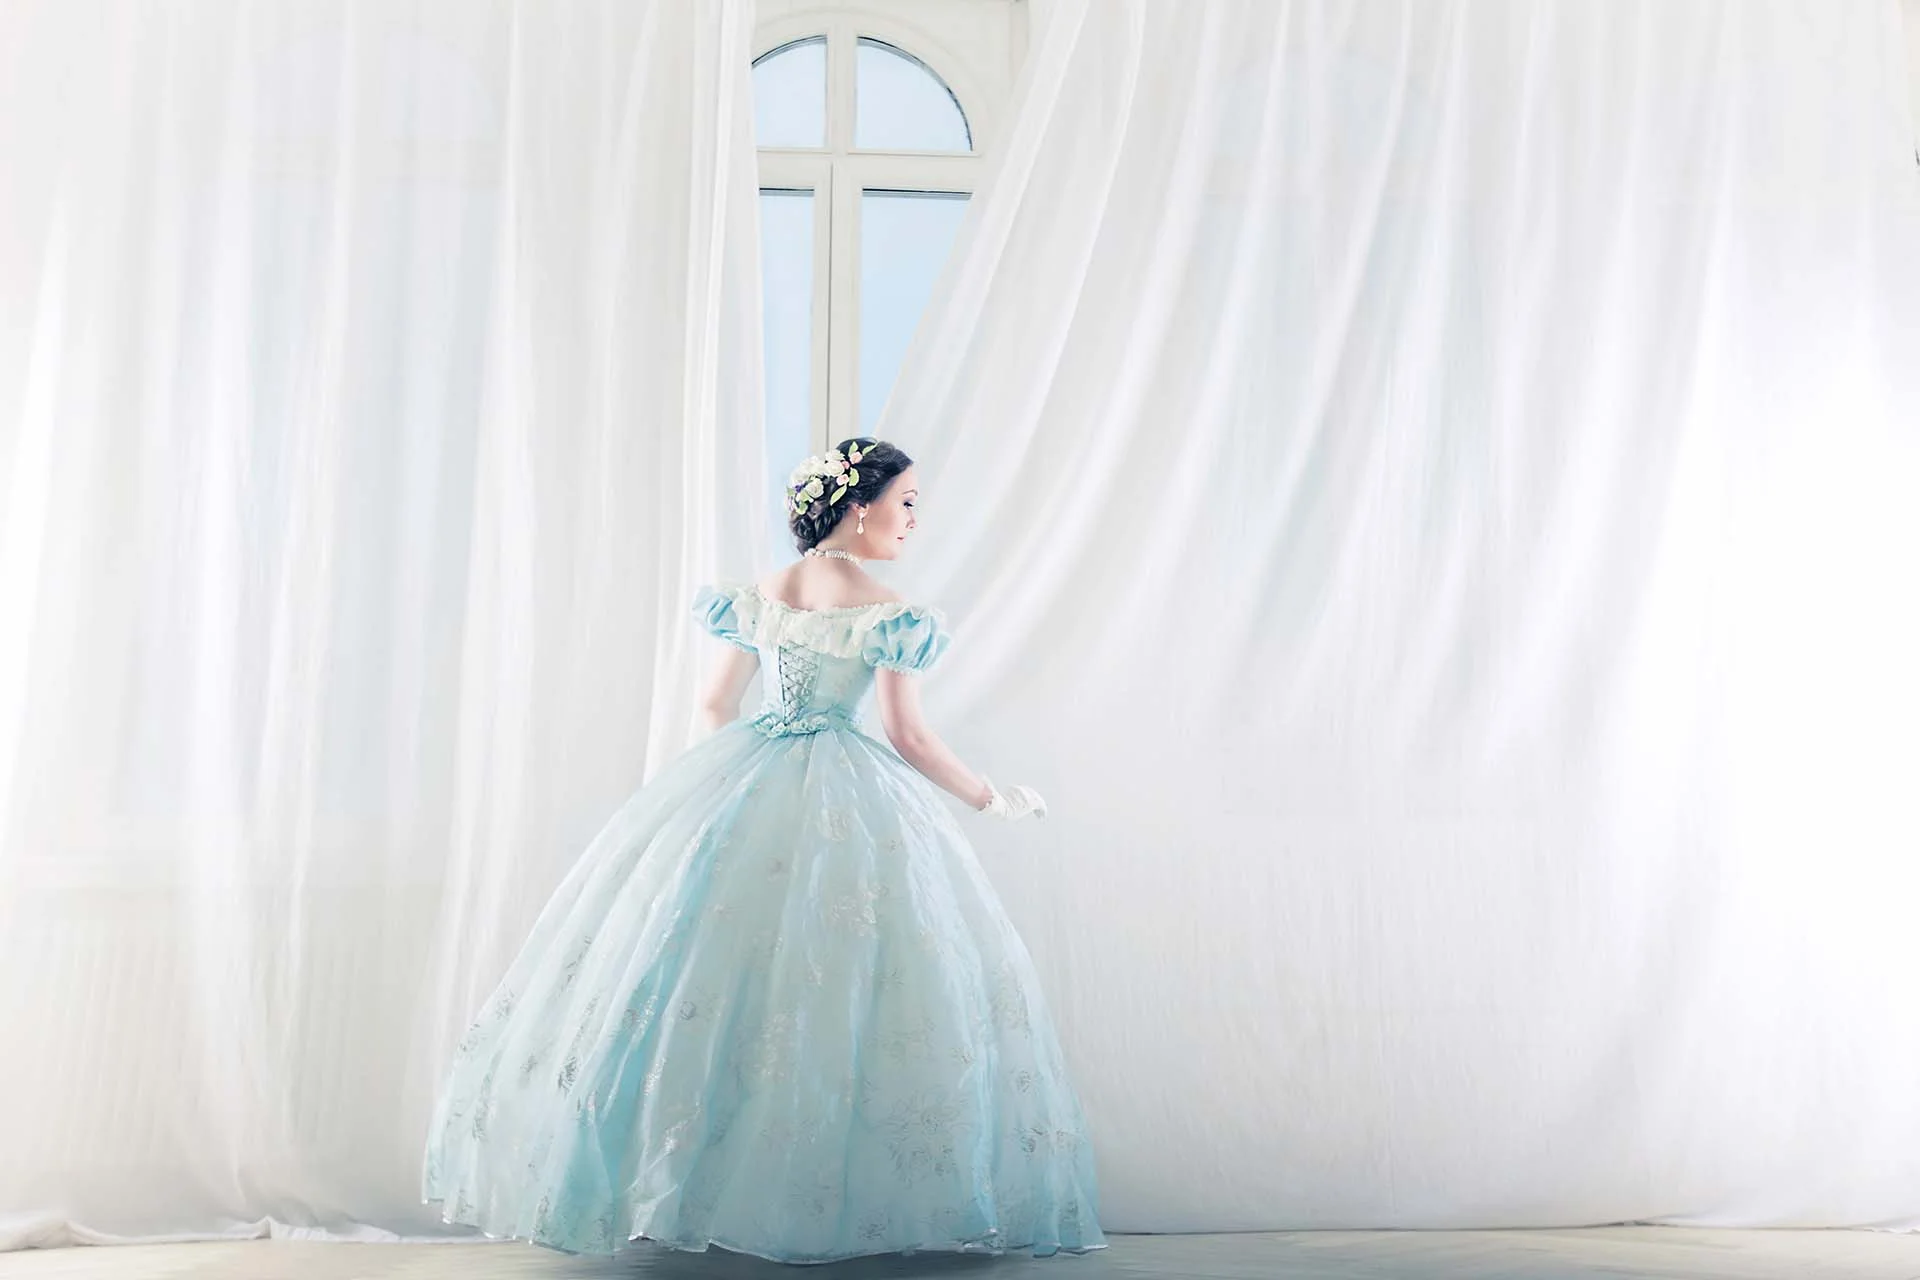 Elegant woman in Ball Gown Wedding Dress straightens the curtains